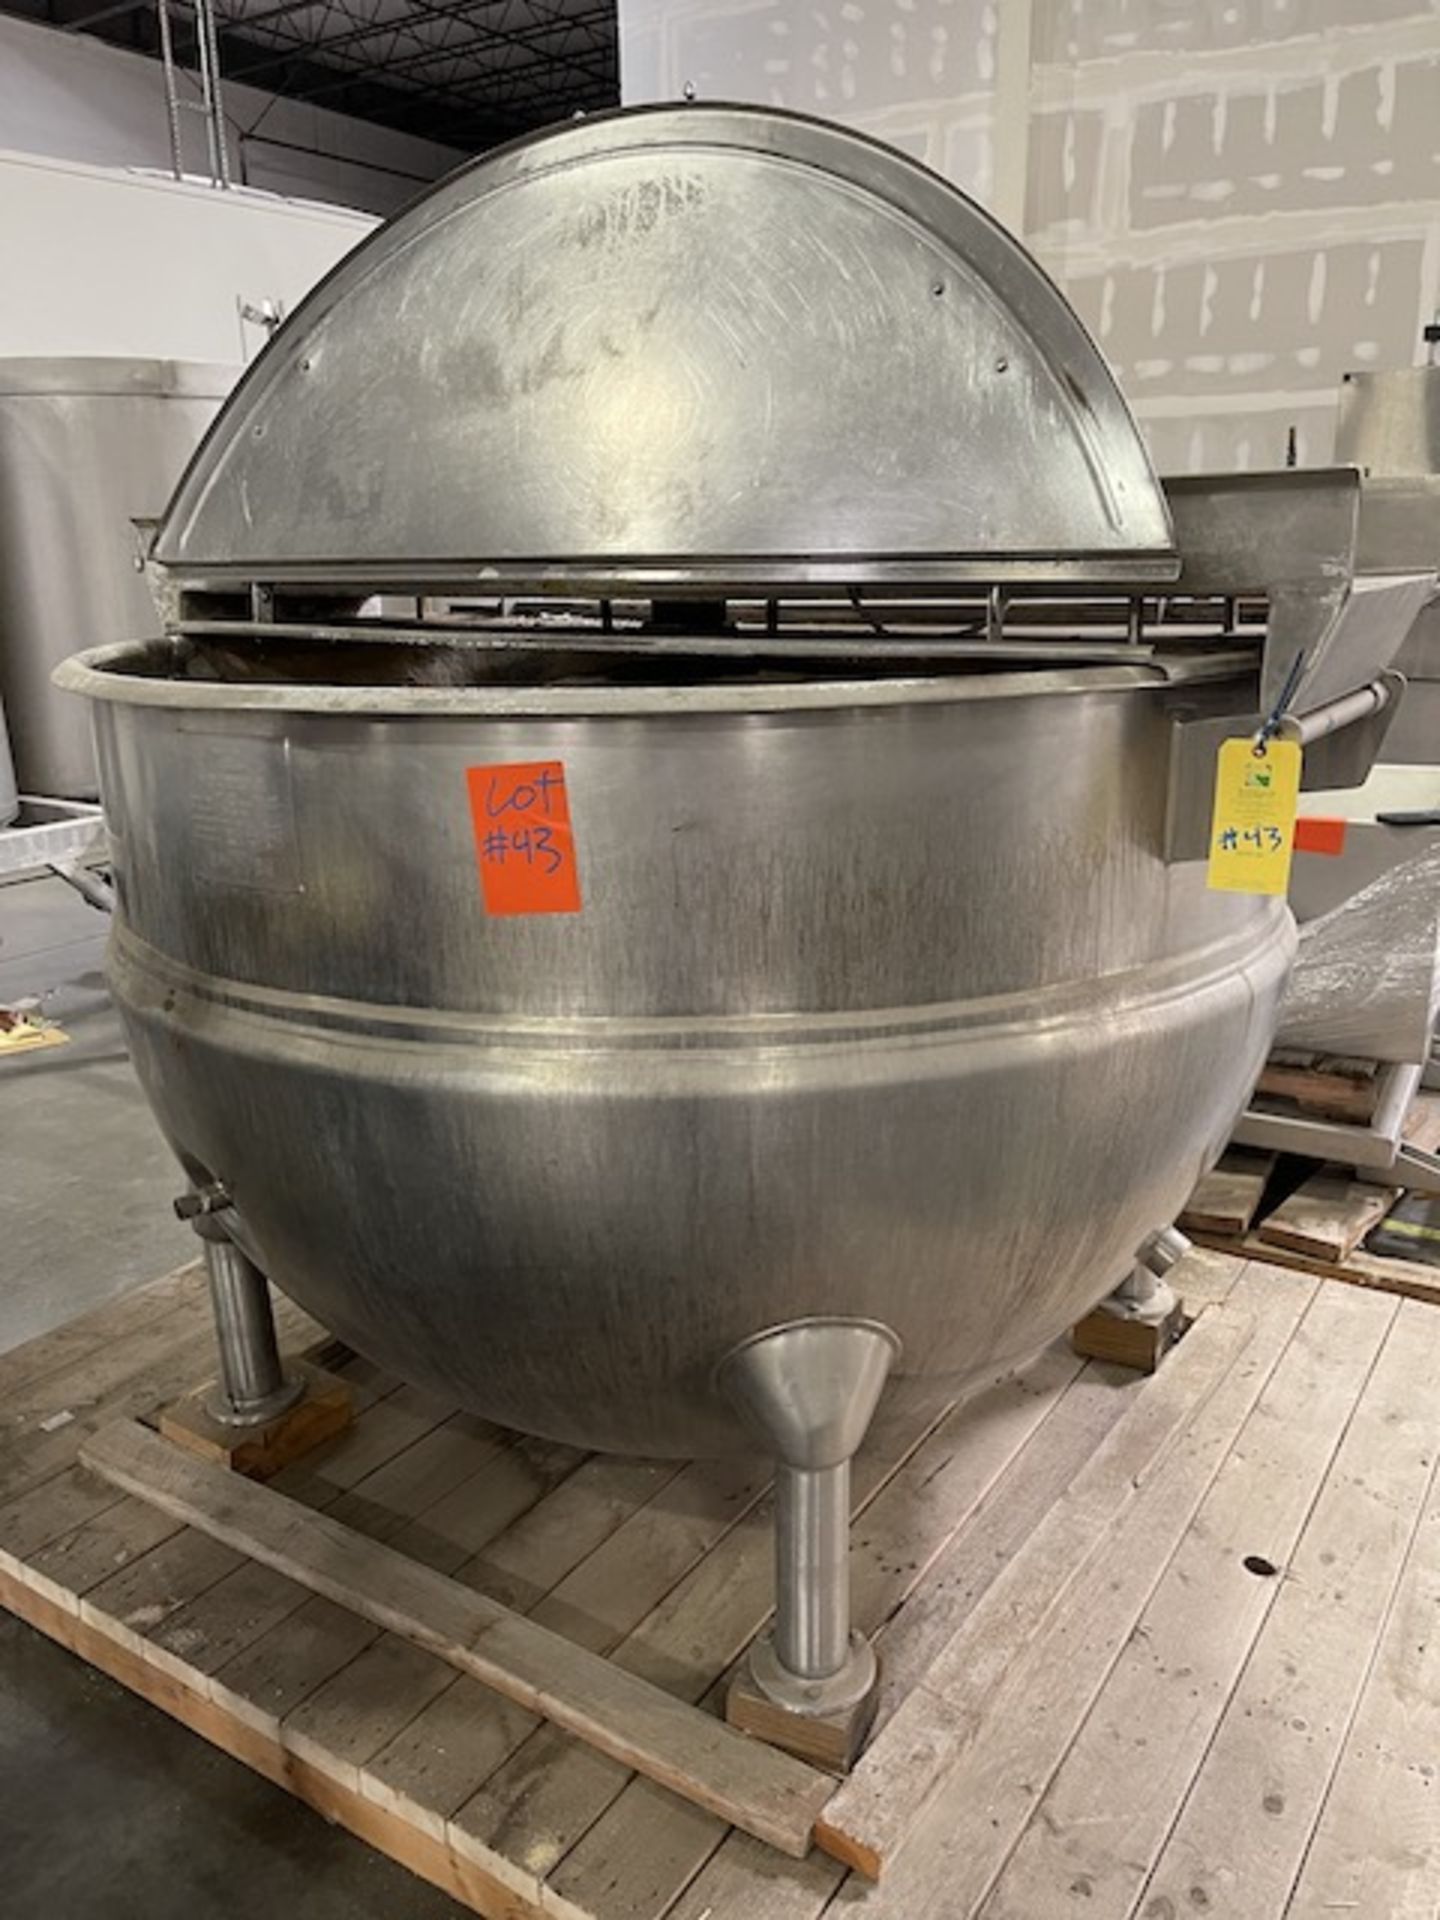 Hamilton 500 Gallon Double Motion Jacketed Kettle with Drive Motor, 90 PSI Rated, Serial #3147, Rigg